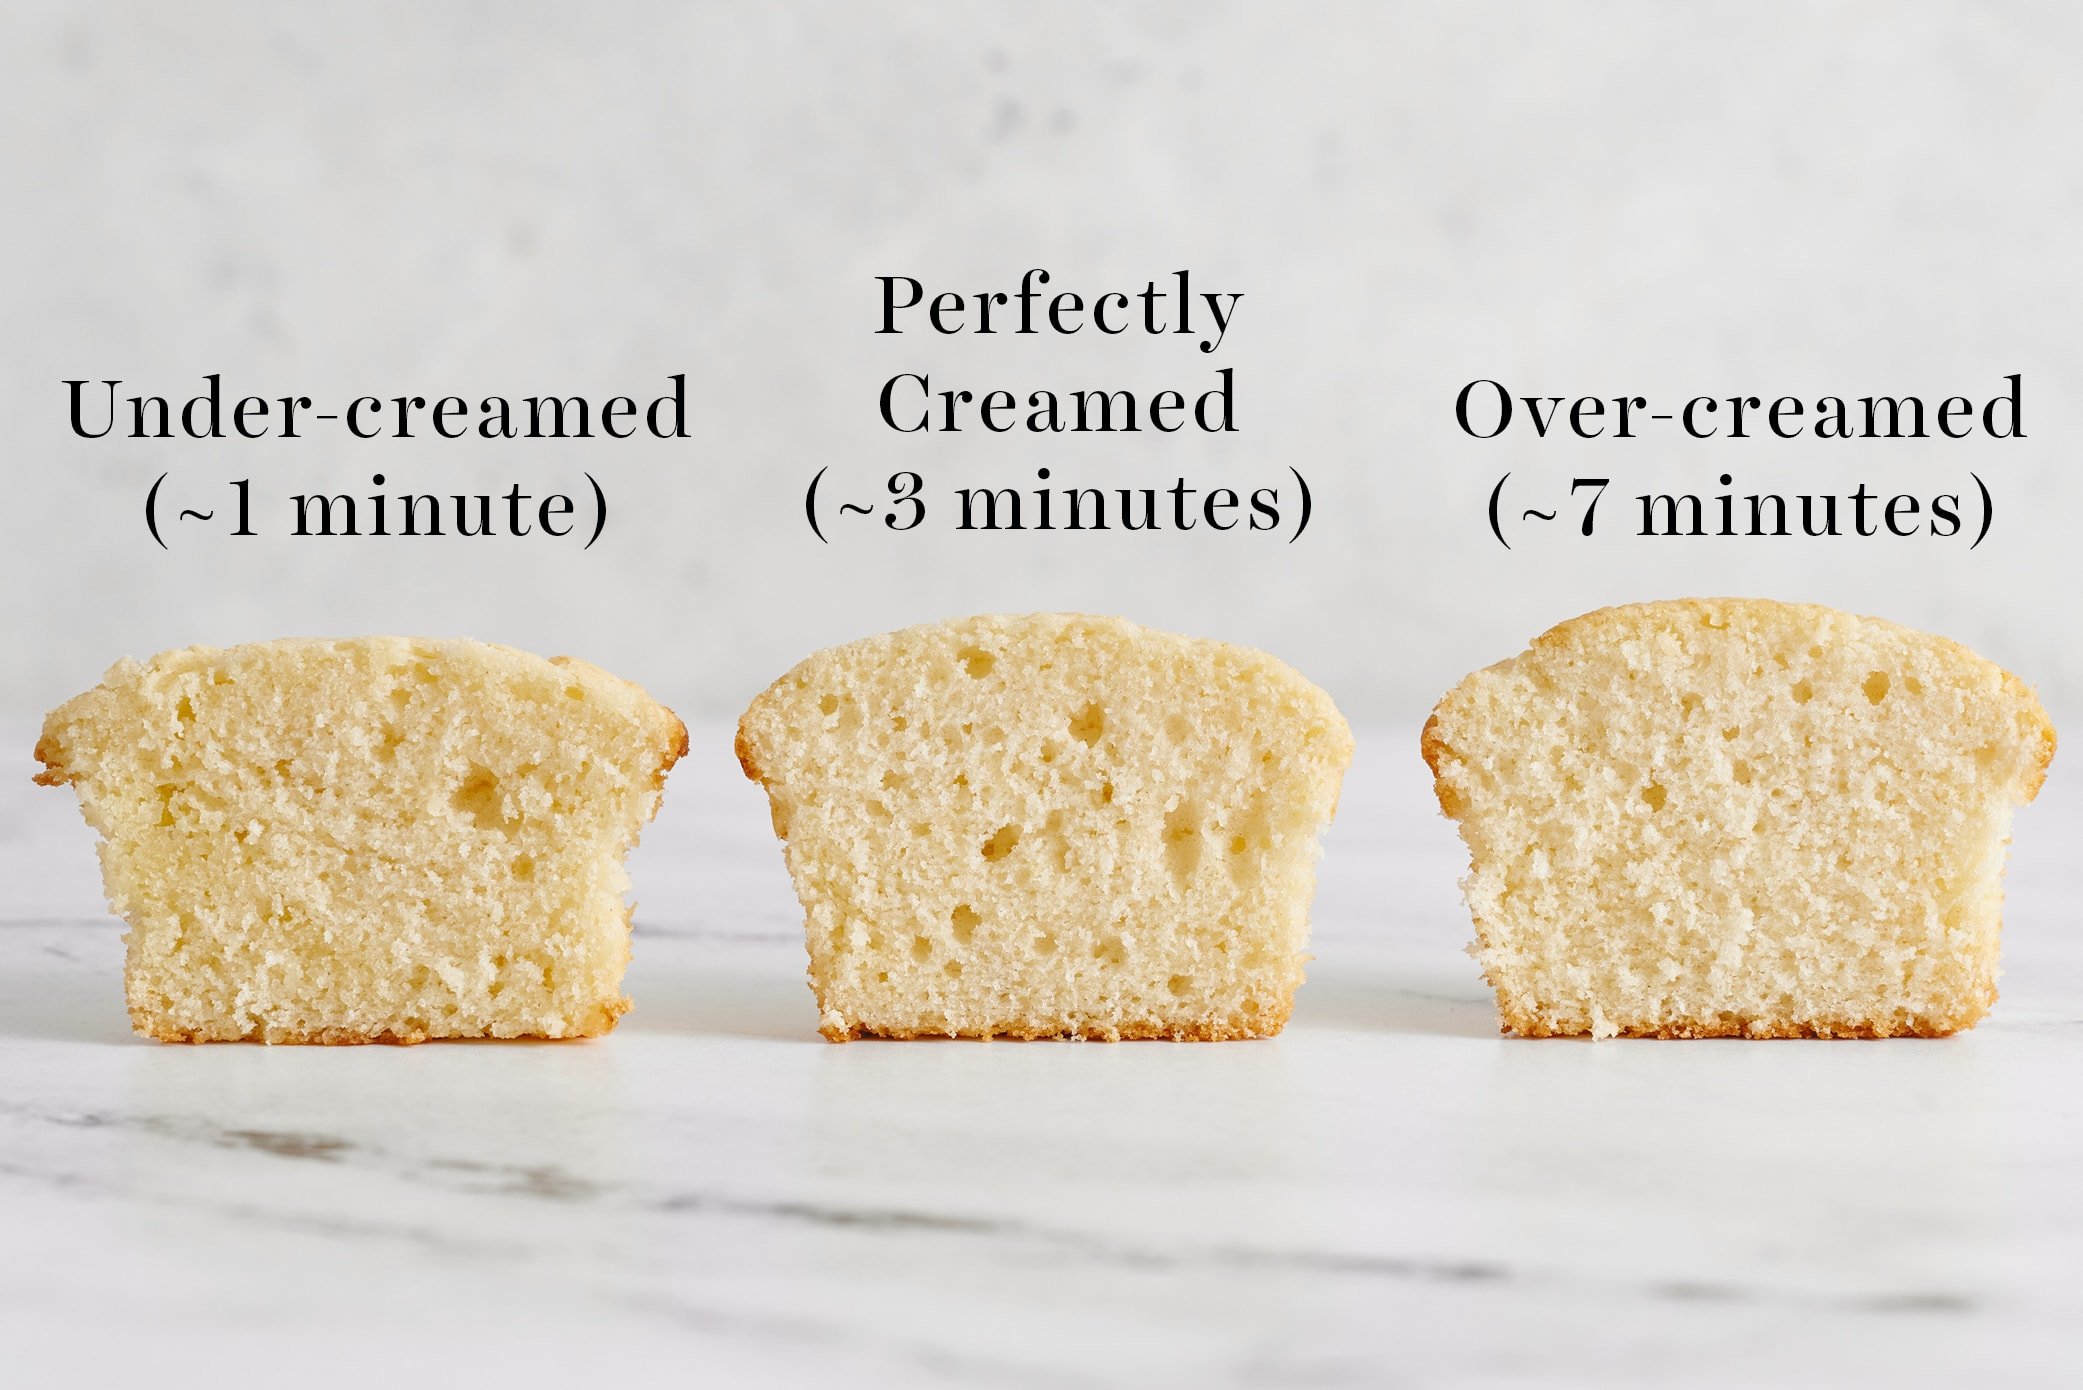 https://handletheheat.com/wp-content/uploads/2021/12/creamed-butter-and-sugar-comparisons-in-cupcakes2-1.jpg